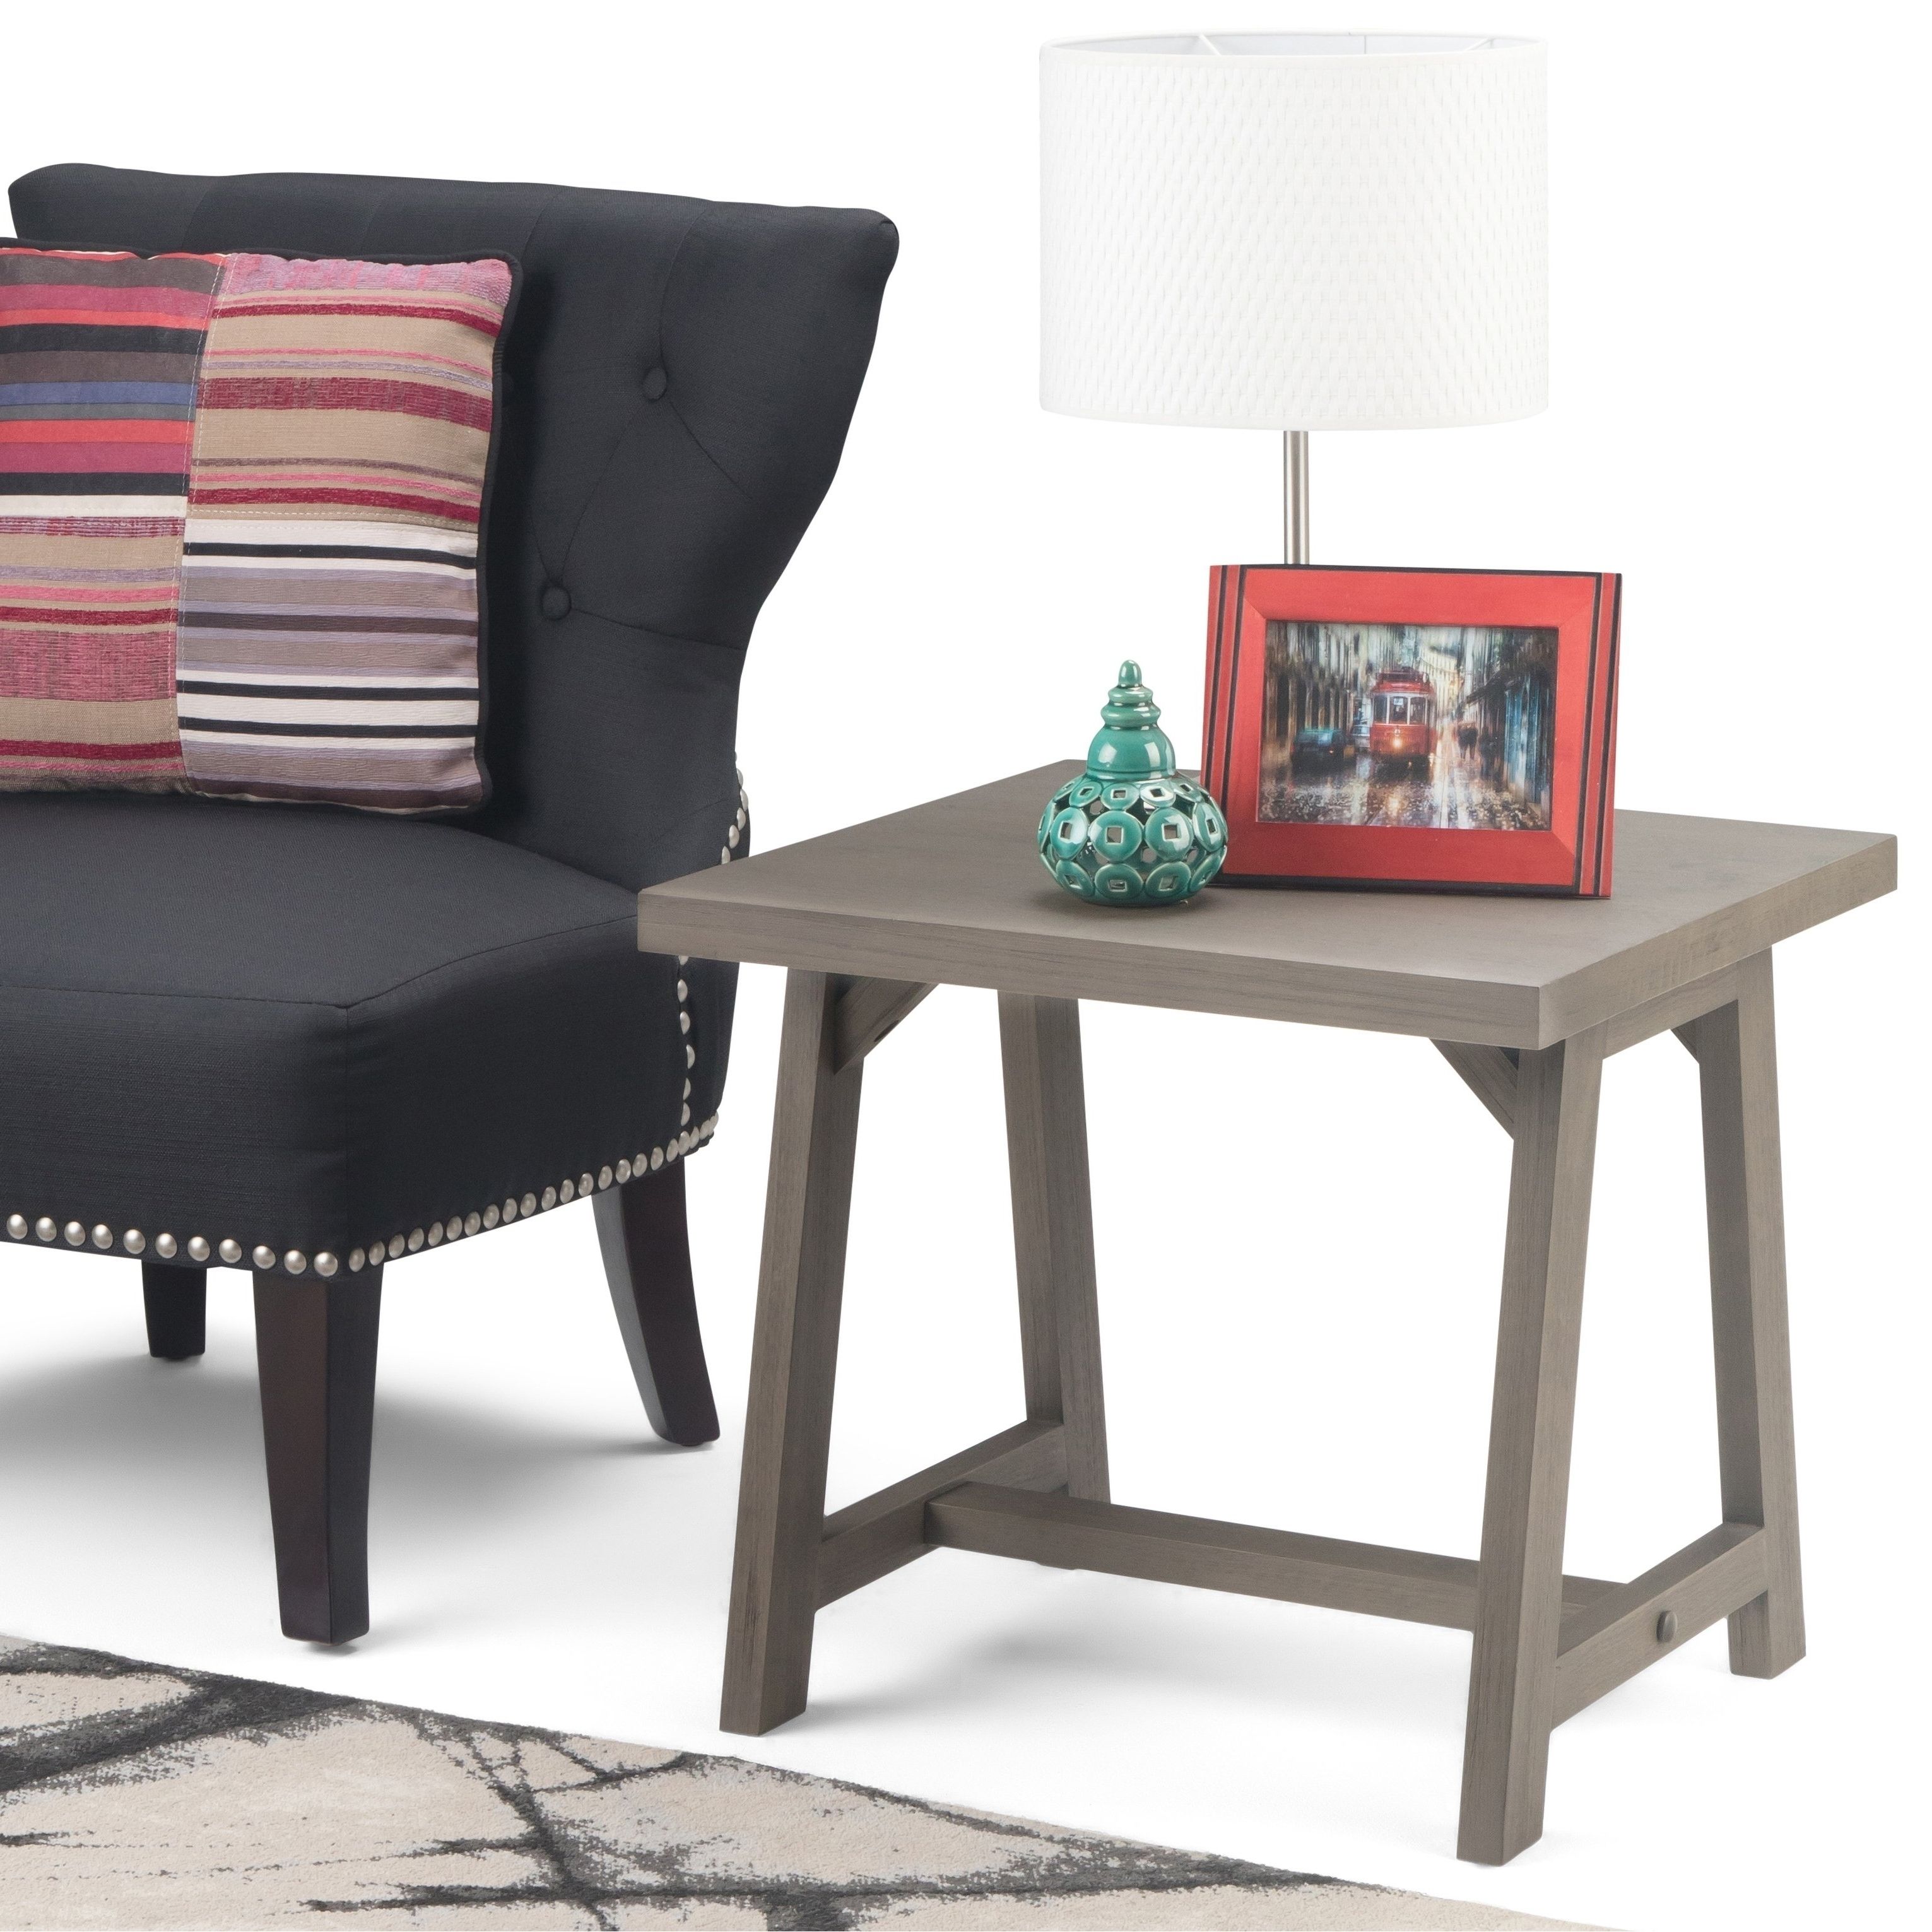 Shop Our Best Home Goods Deals Online At Overstock Inside Garten Onyx Chairs With Greywash Finish Set Of  (View 7 of 20)